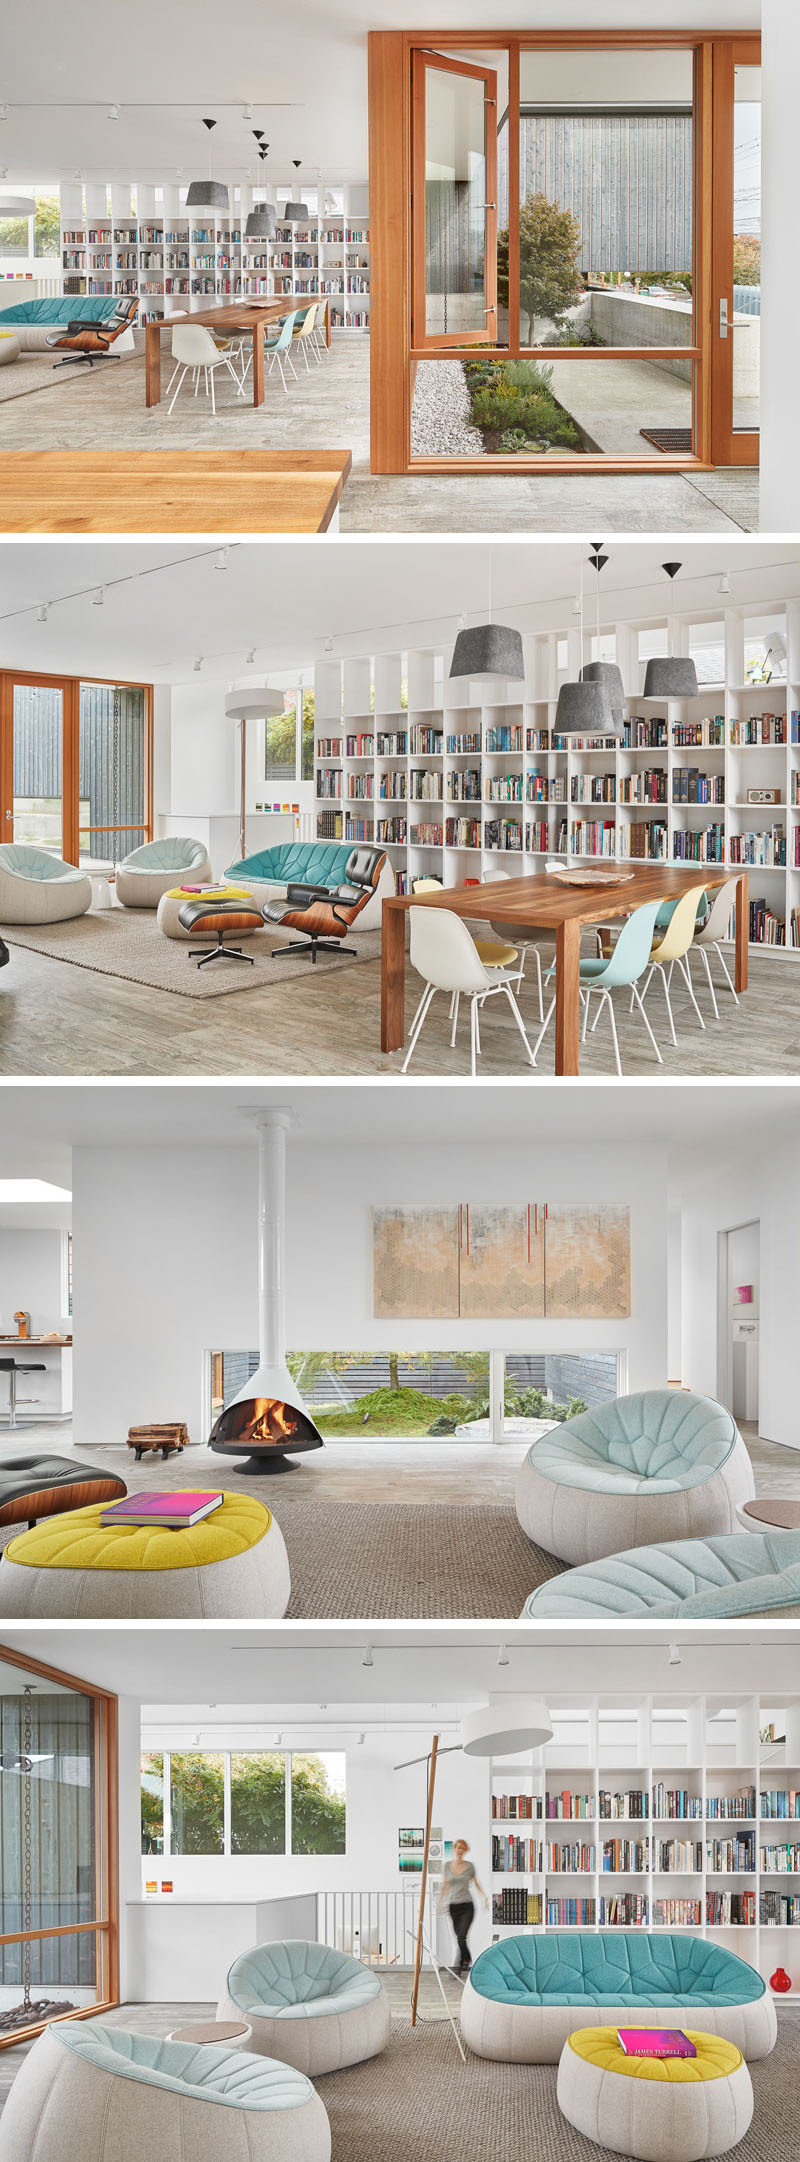 Inside this modern home, the living room has a wall of custom bookshelves, comfortable sofas and a wooden dining table surrounded by colored chairs.